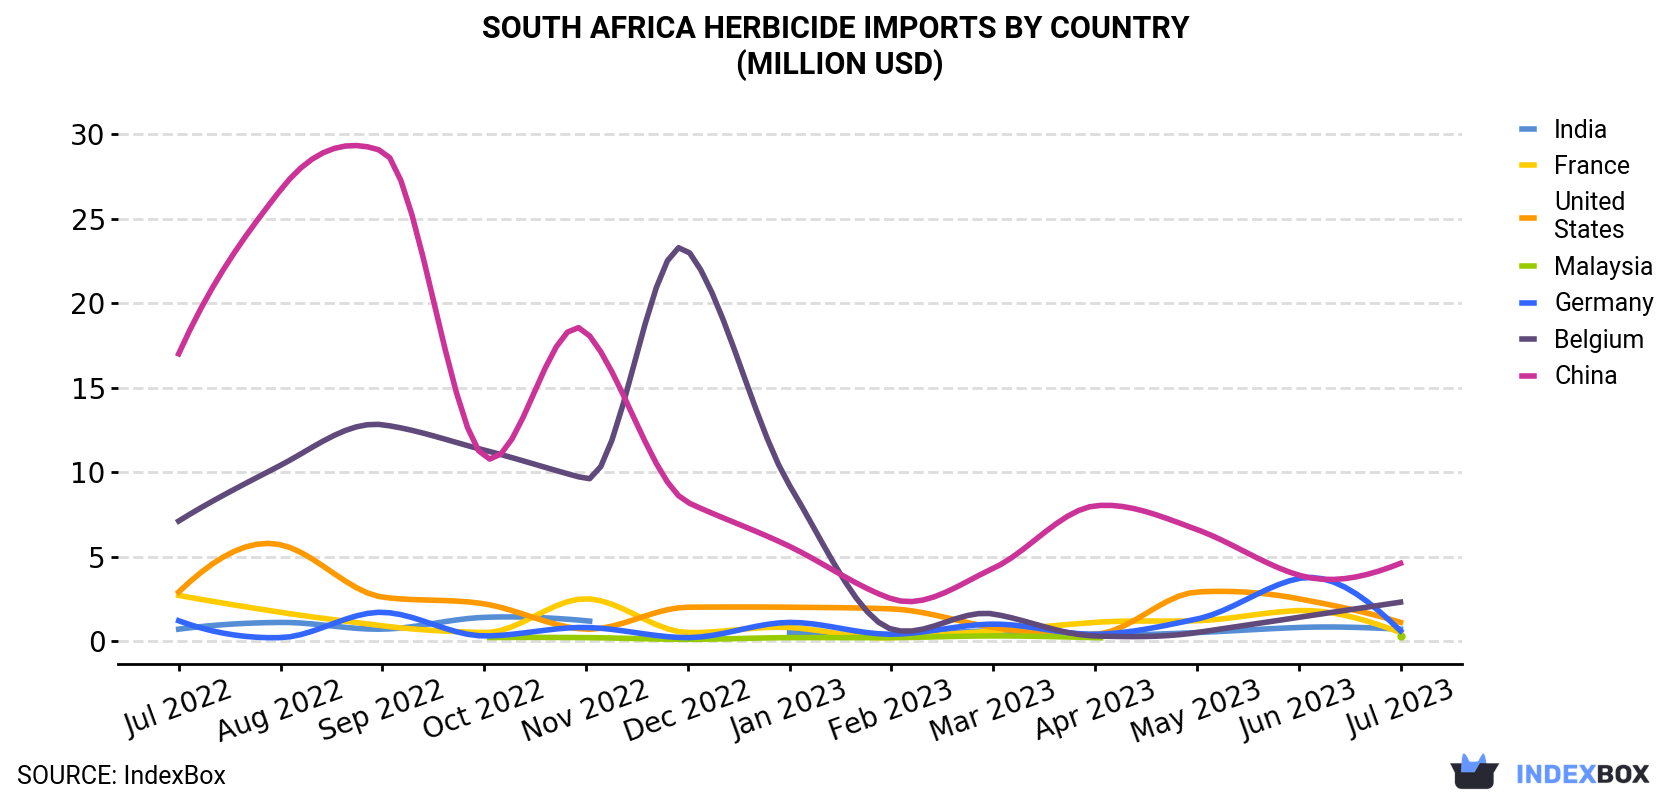 South Africa Herbicide Imports By Country (Million USD)